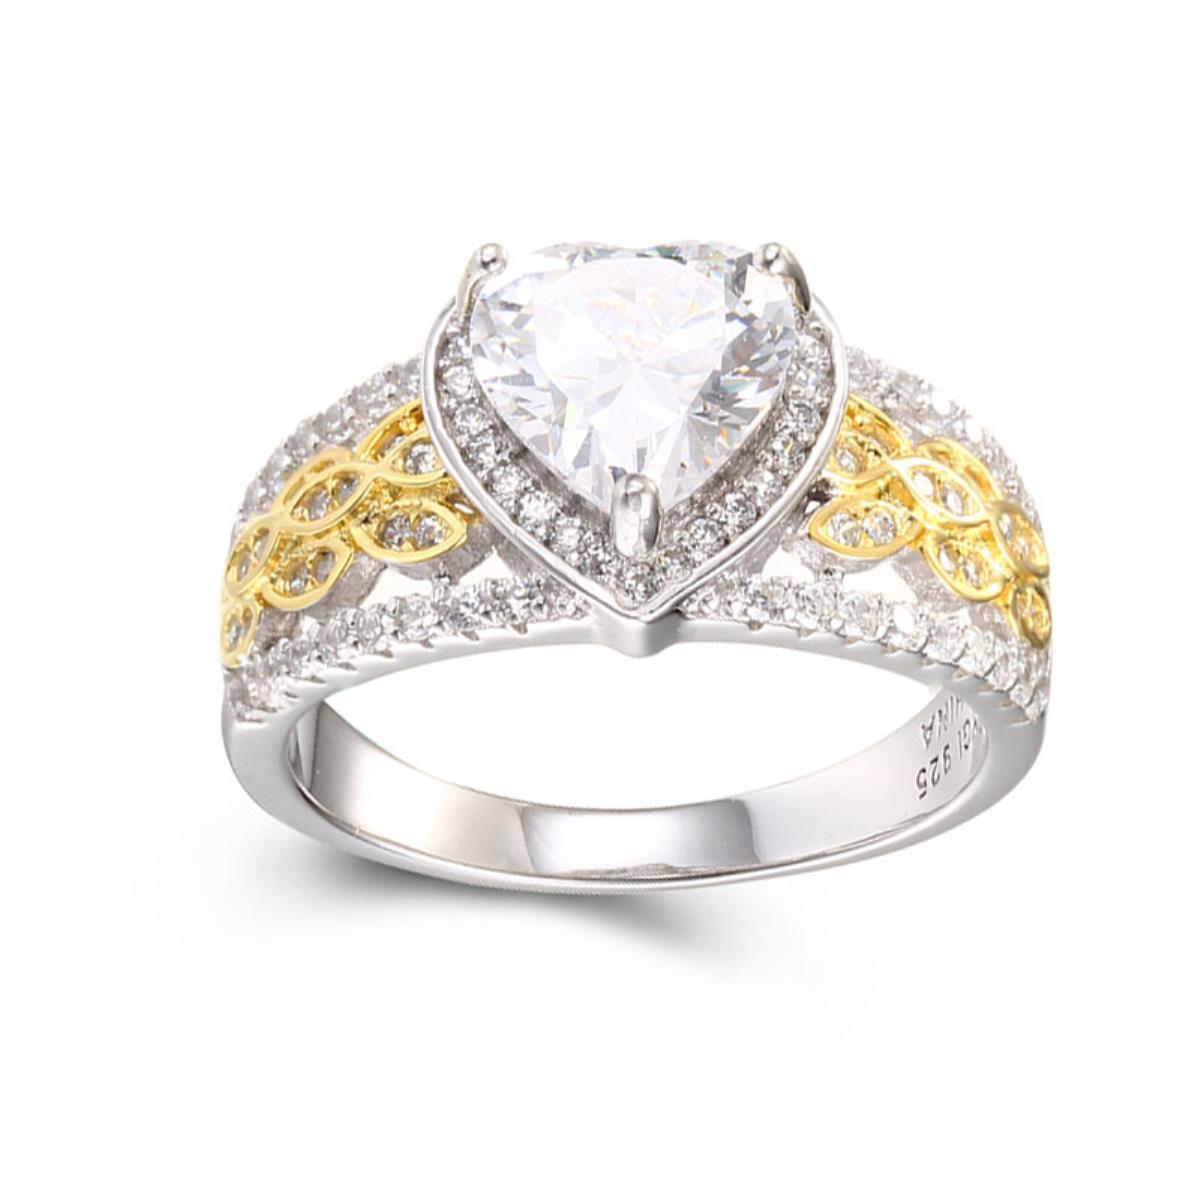 Sterling Silver Two-Tone (W/Y) 8mm HS White CZ Center & Rnd White CZ Halo Heart Shape 10.5mm Ring